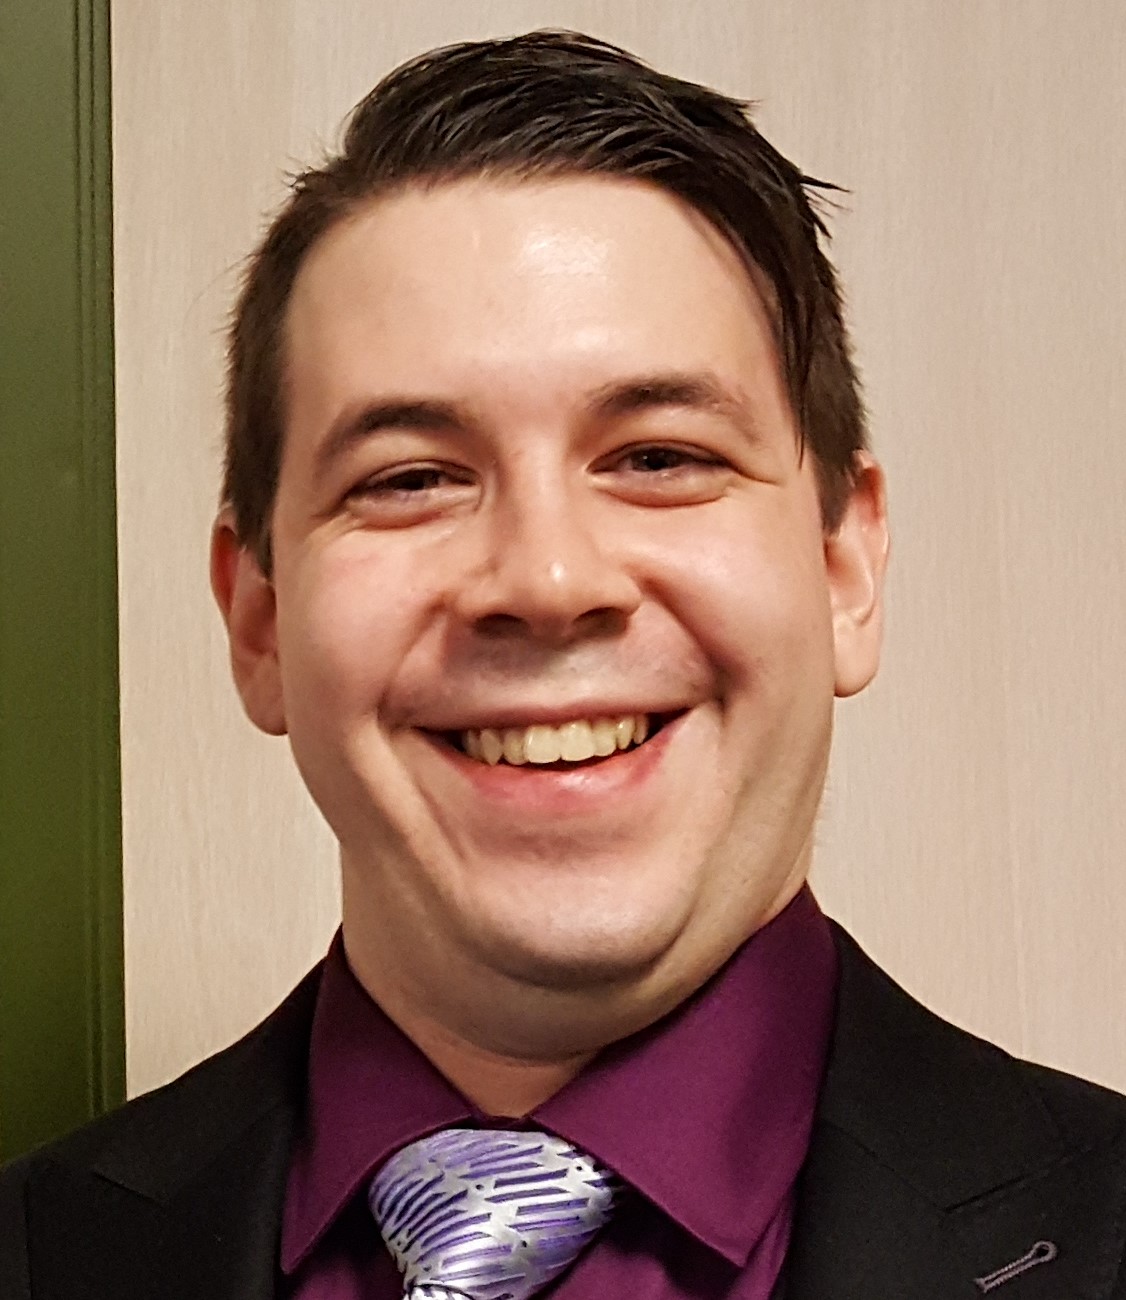 A picture of Eric De Wildt wearing a black suit, deep purple shirt, and silver and purple tie. Eric has long bangs and his hair is combed to his left and held in place with product. Eric is smiling and is a bit chubby.